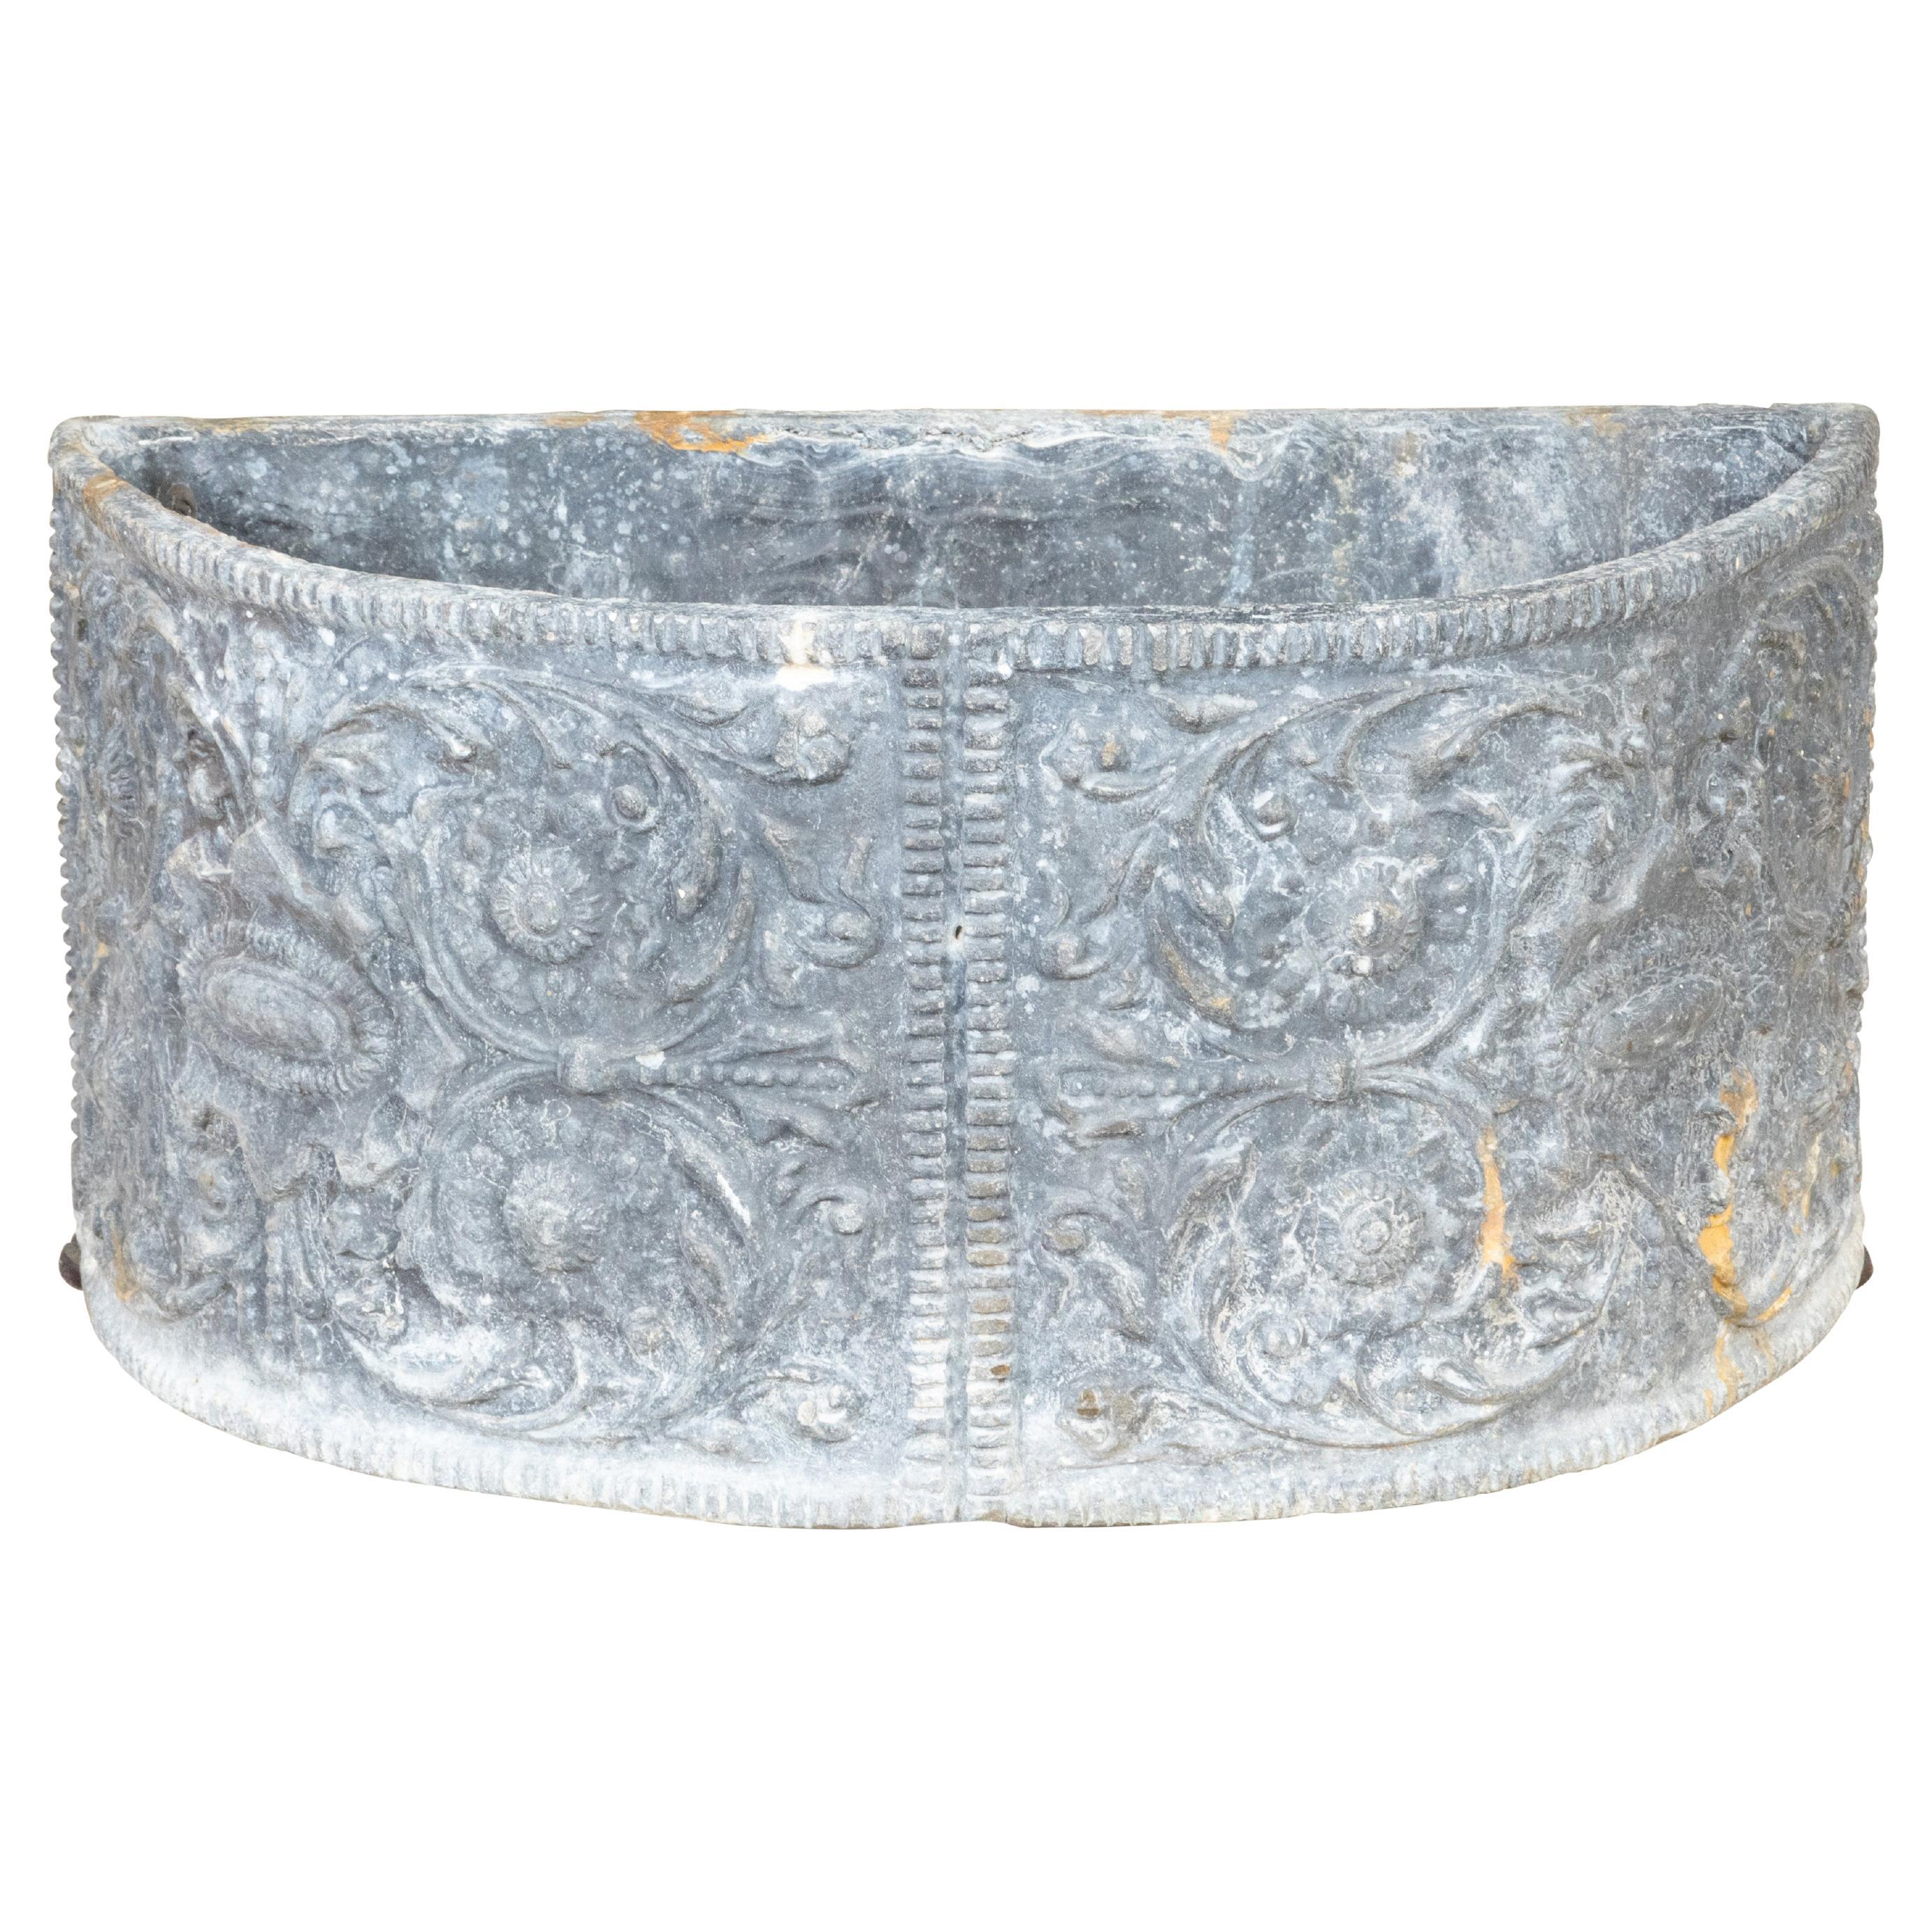 French Turn of the Century Semi-Circular Lead Jardinière with Scrollwork Foliage For Sale